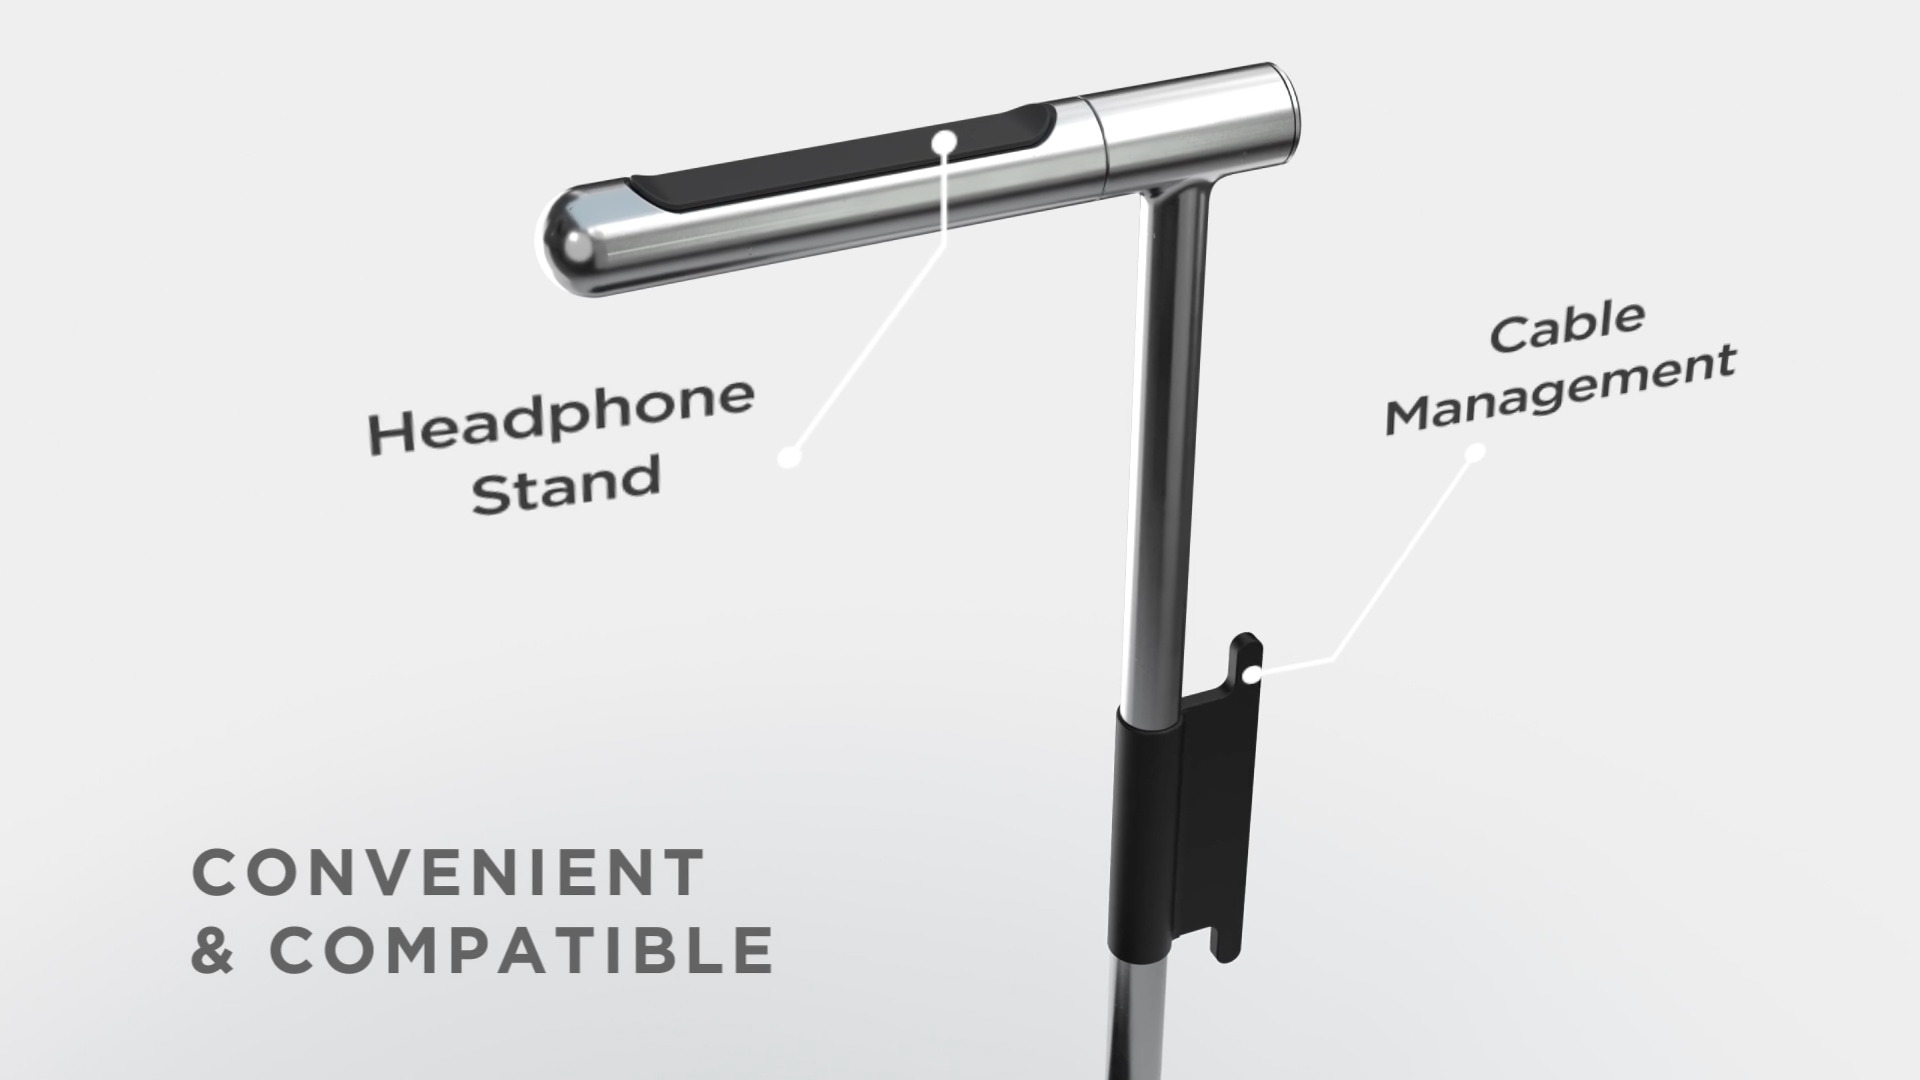 A still image from Satechi's promotional video showing cable management and the top base of its 2-in-1 Headphone Stand with Wireless Charger